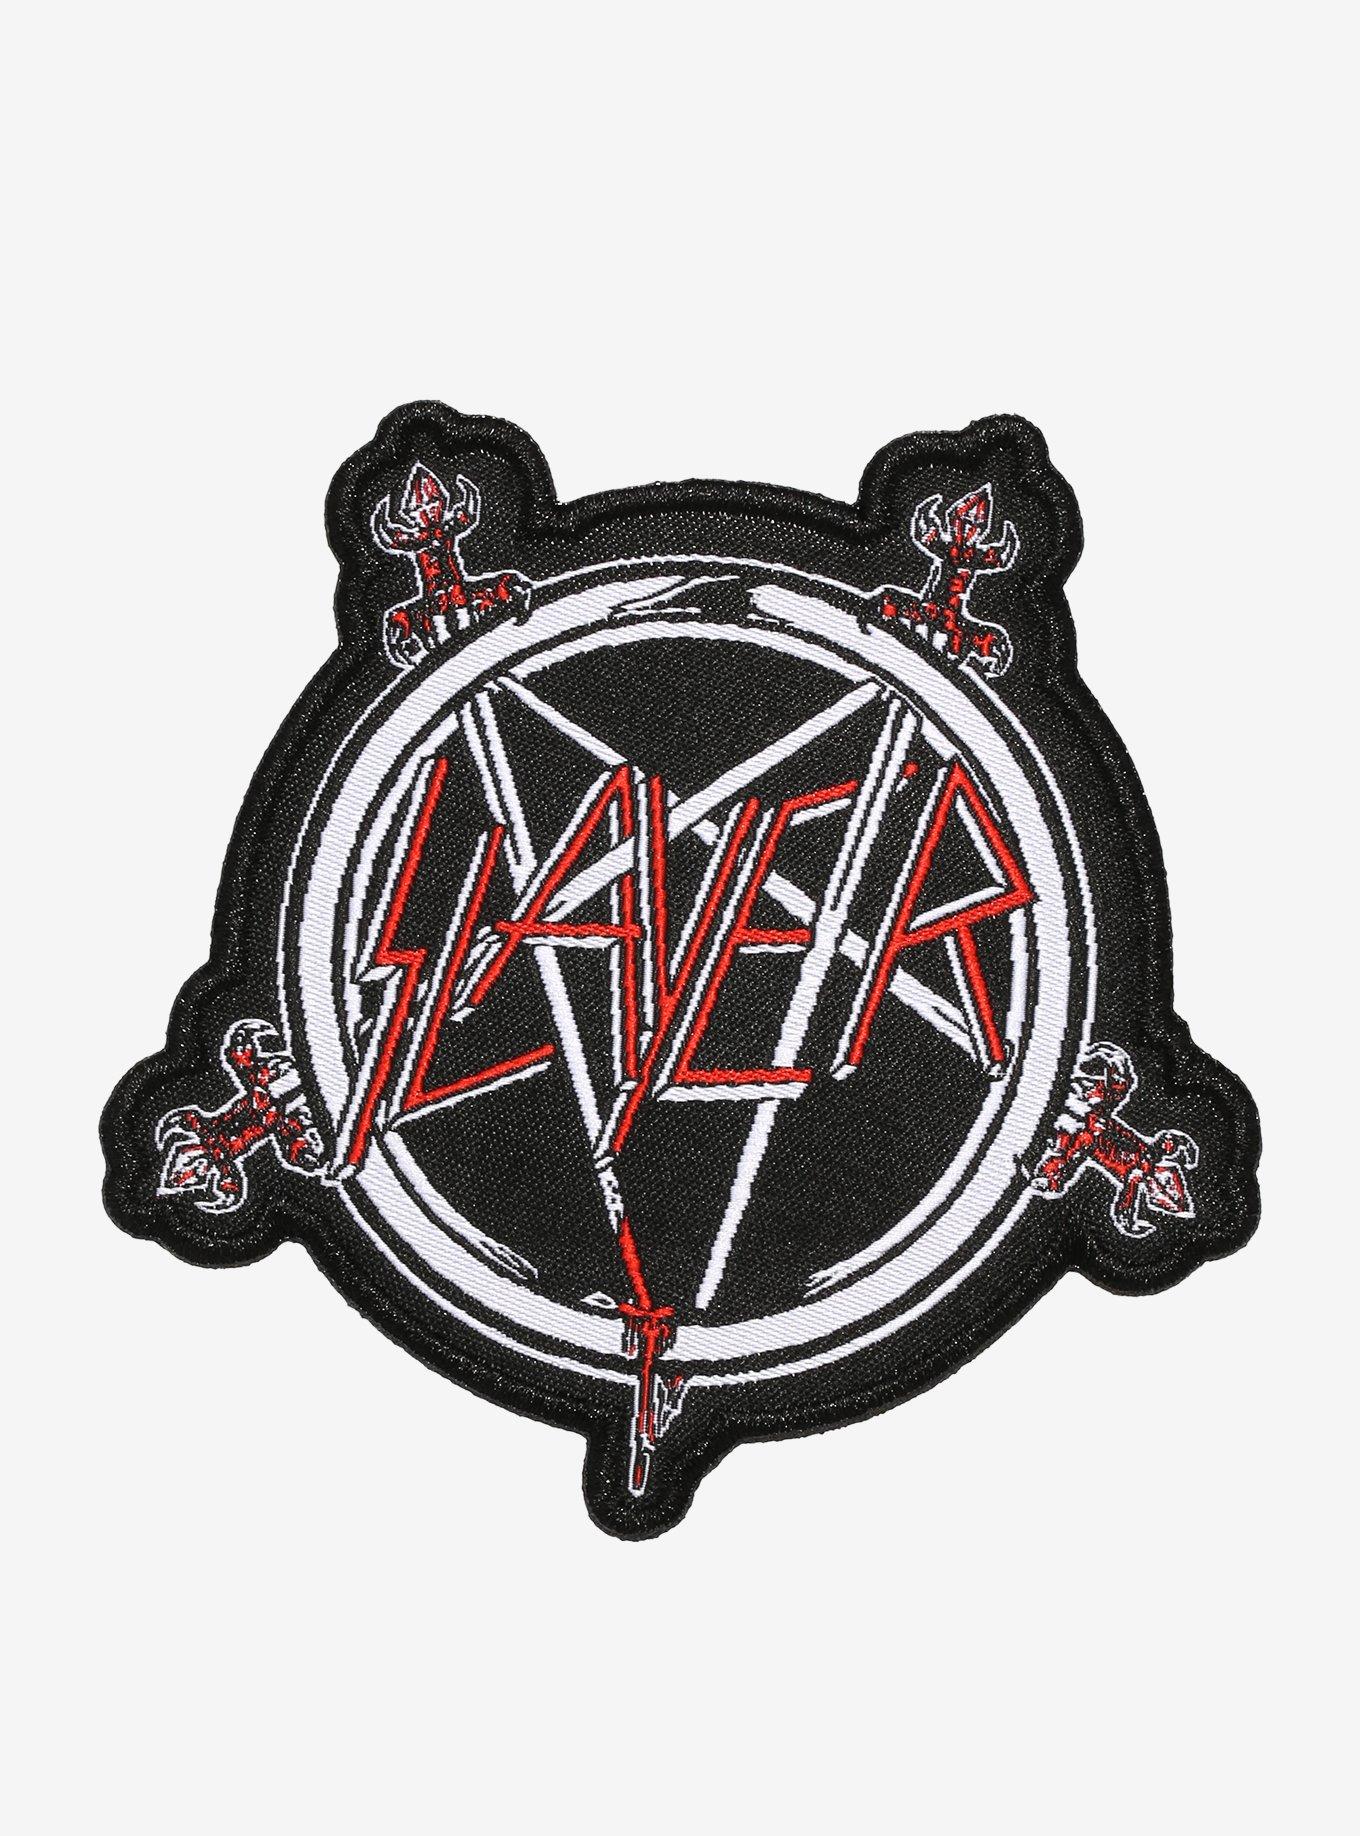 Slayer Haunting The Chapel Patch